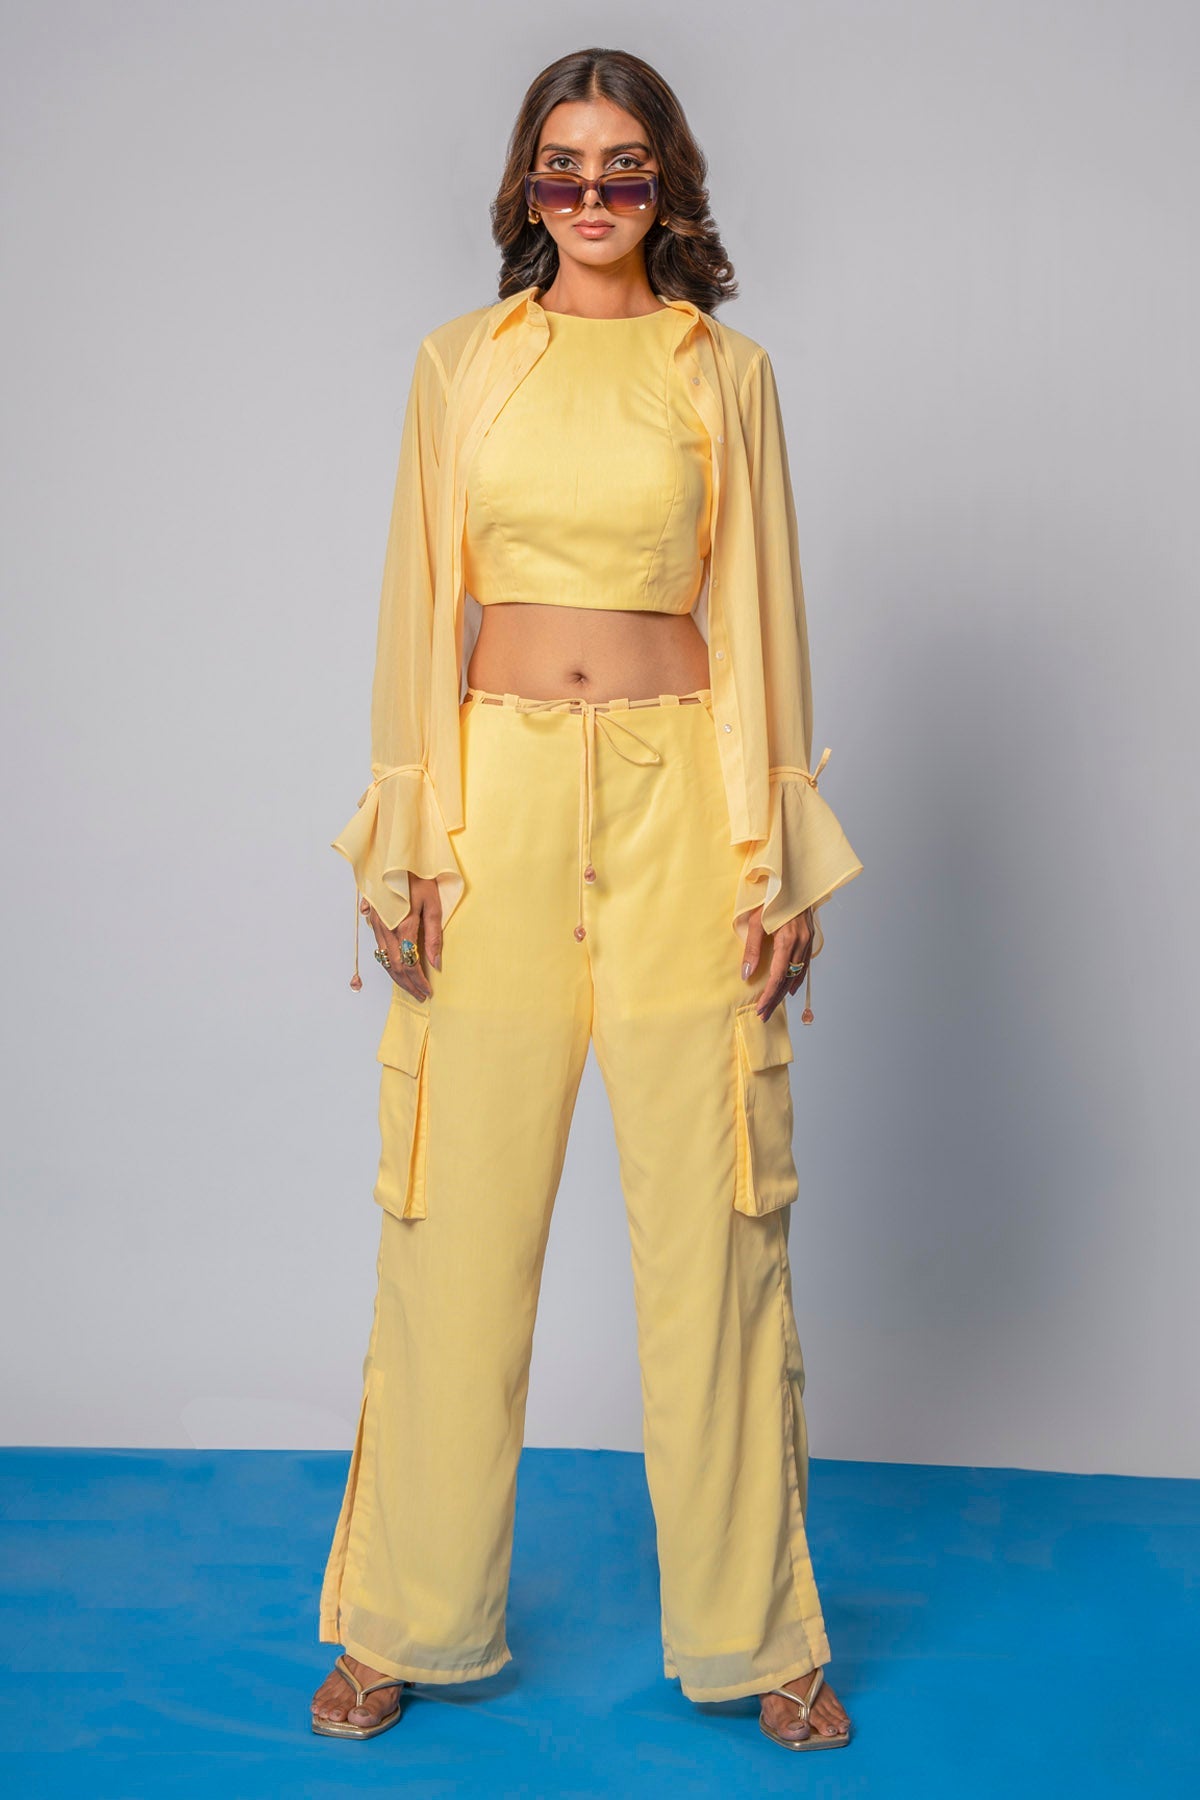 The Decem Ally Yellow Chiffon Shirt Co-ord Set for Women online available at scrollnshops